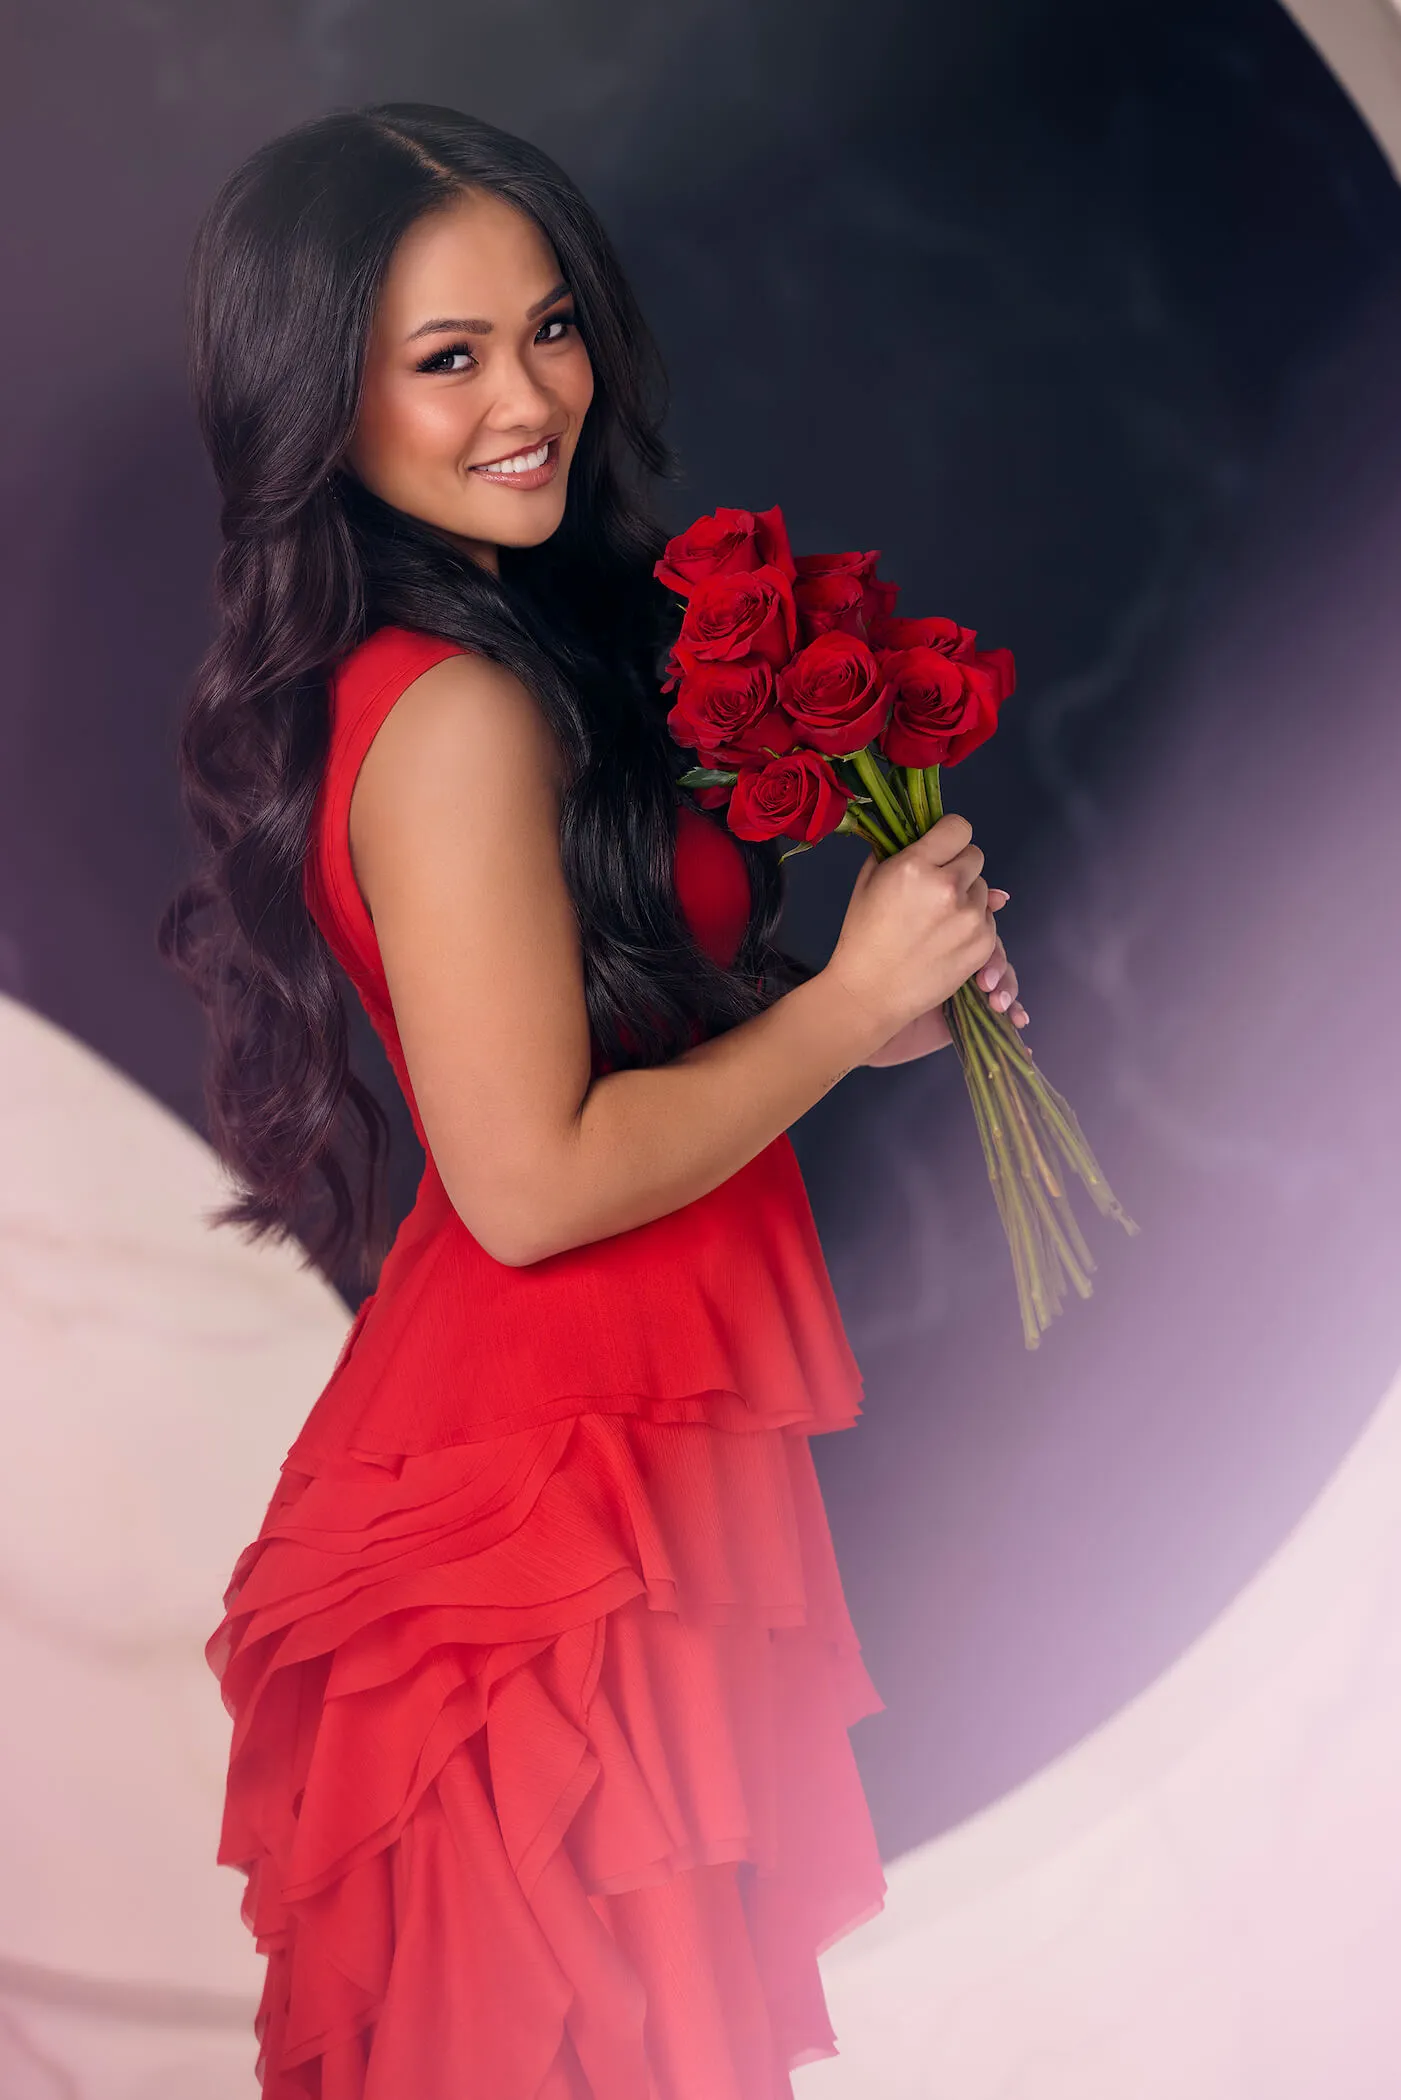 'The Bachelorette' Season 21 star Jenn Tran in a red dress holding red roses and looking over her shoulder while smiling